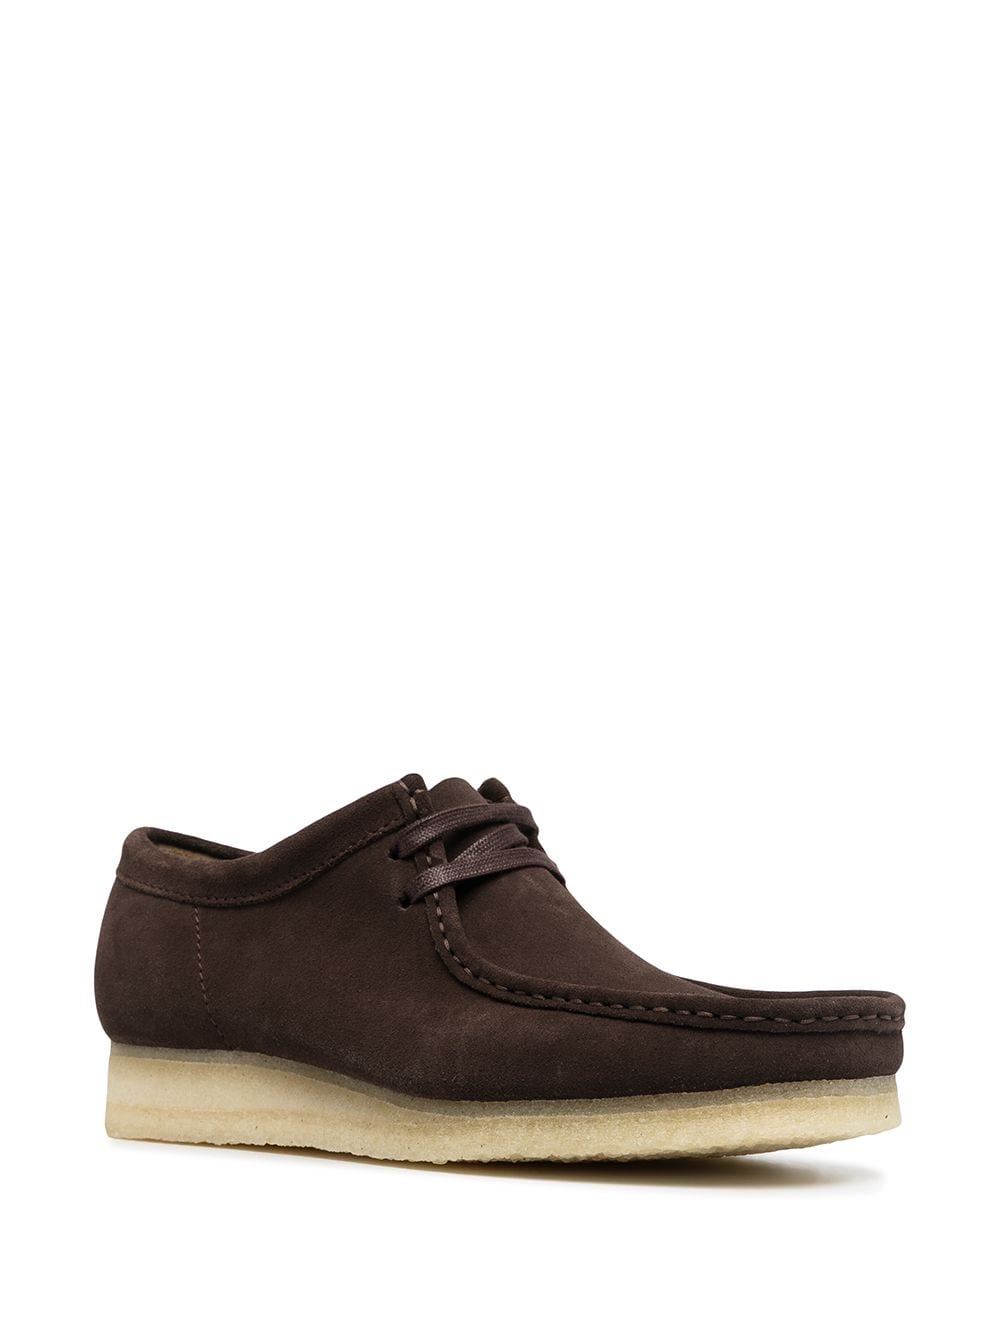 Shop Clarks Originals Wallabee suede shoes with Express Delivery - FARFETCH